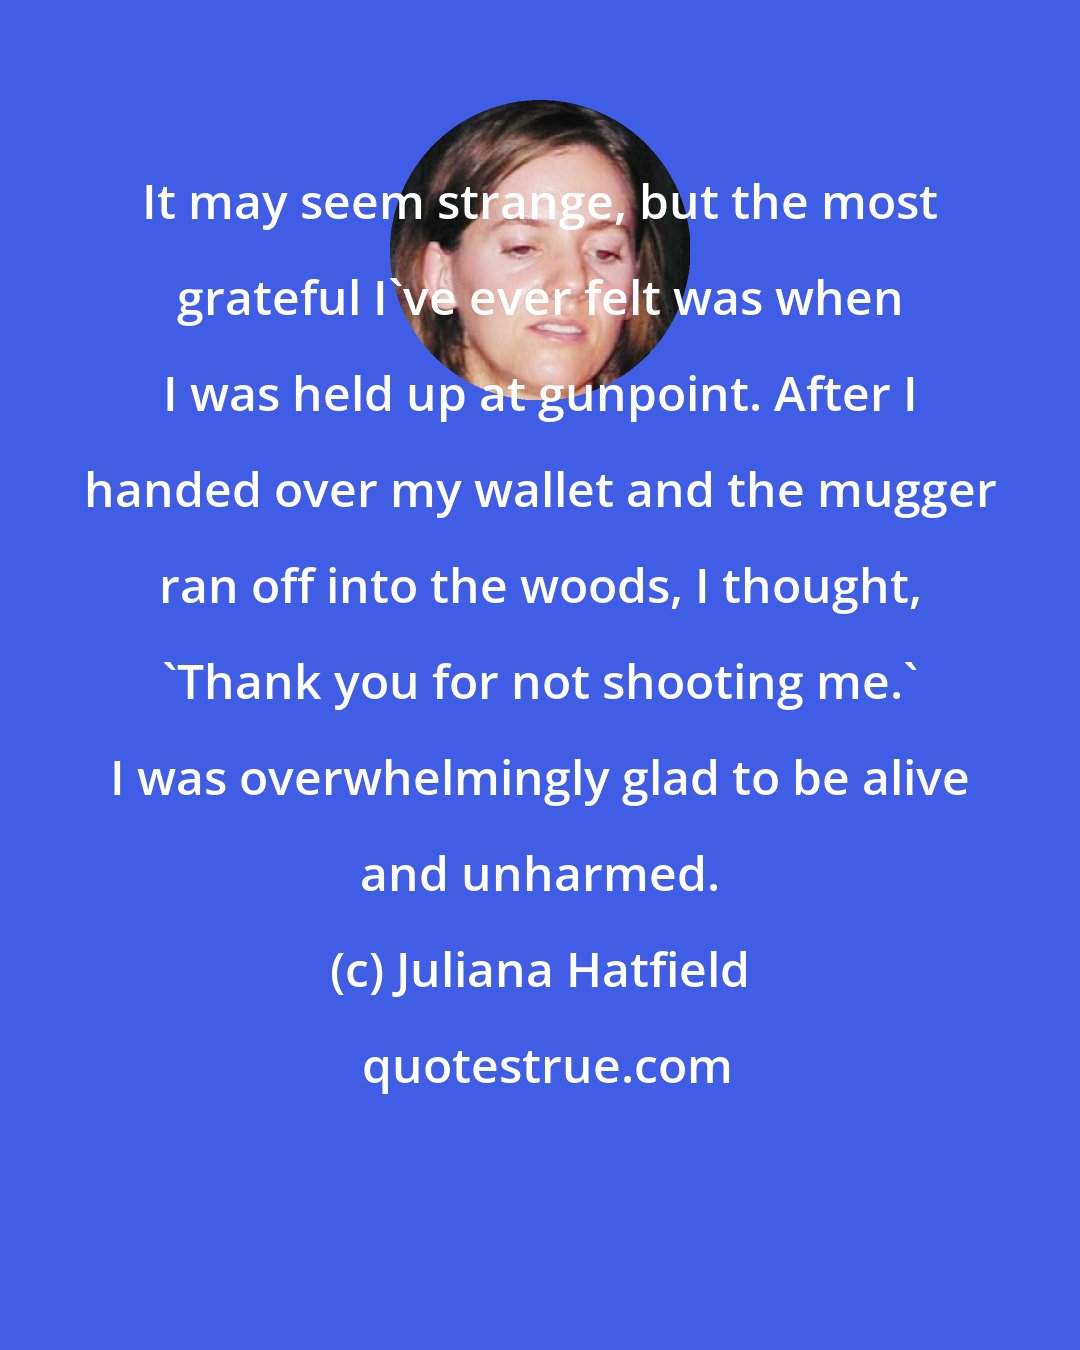 Juliana Hatfield: It may seem strange, but the most grateful I've ever felt was when I was held up at gunpoint. After I handed over my wallet and the mugger ran off into the woods, I thought, 'Thank you for not shooting me.' I was overwhelmingly glad to be alive and unharmed.